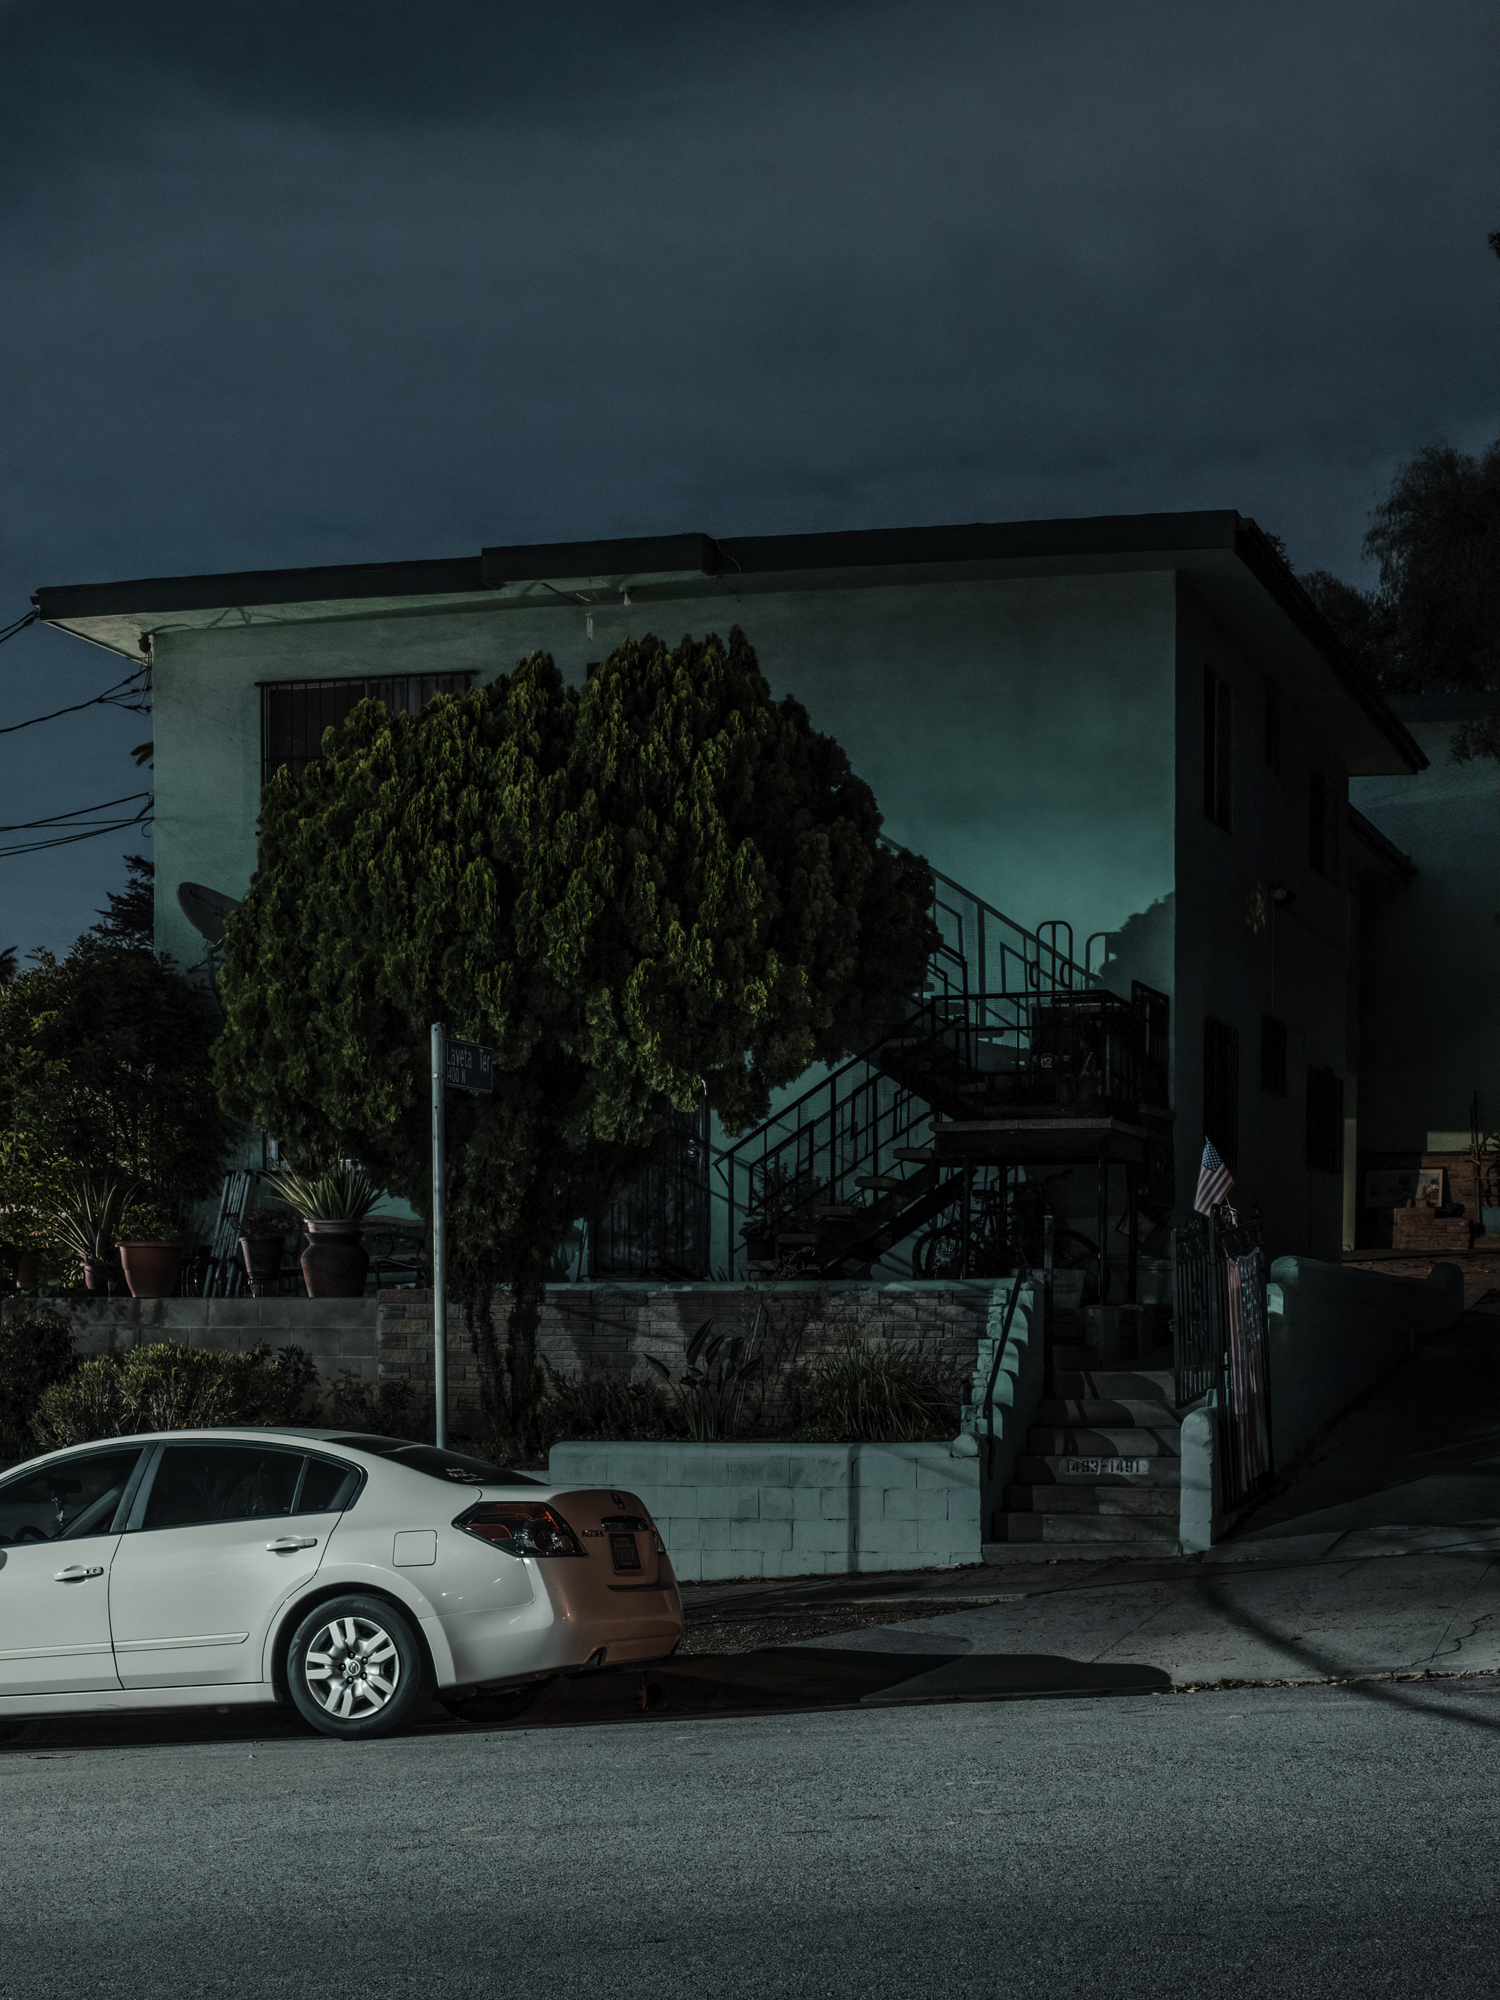    House on Levetta and Scott, Los Angeles, 2018.     Archival Pigment Print.  30” x 40” - Limited Edition of 2 | 24” x 32” - Limited Edition of 3 | 18” x 24” - Limited Edition of 5  Pricing &amp; Purchase Info:  Leon Gallery  